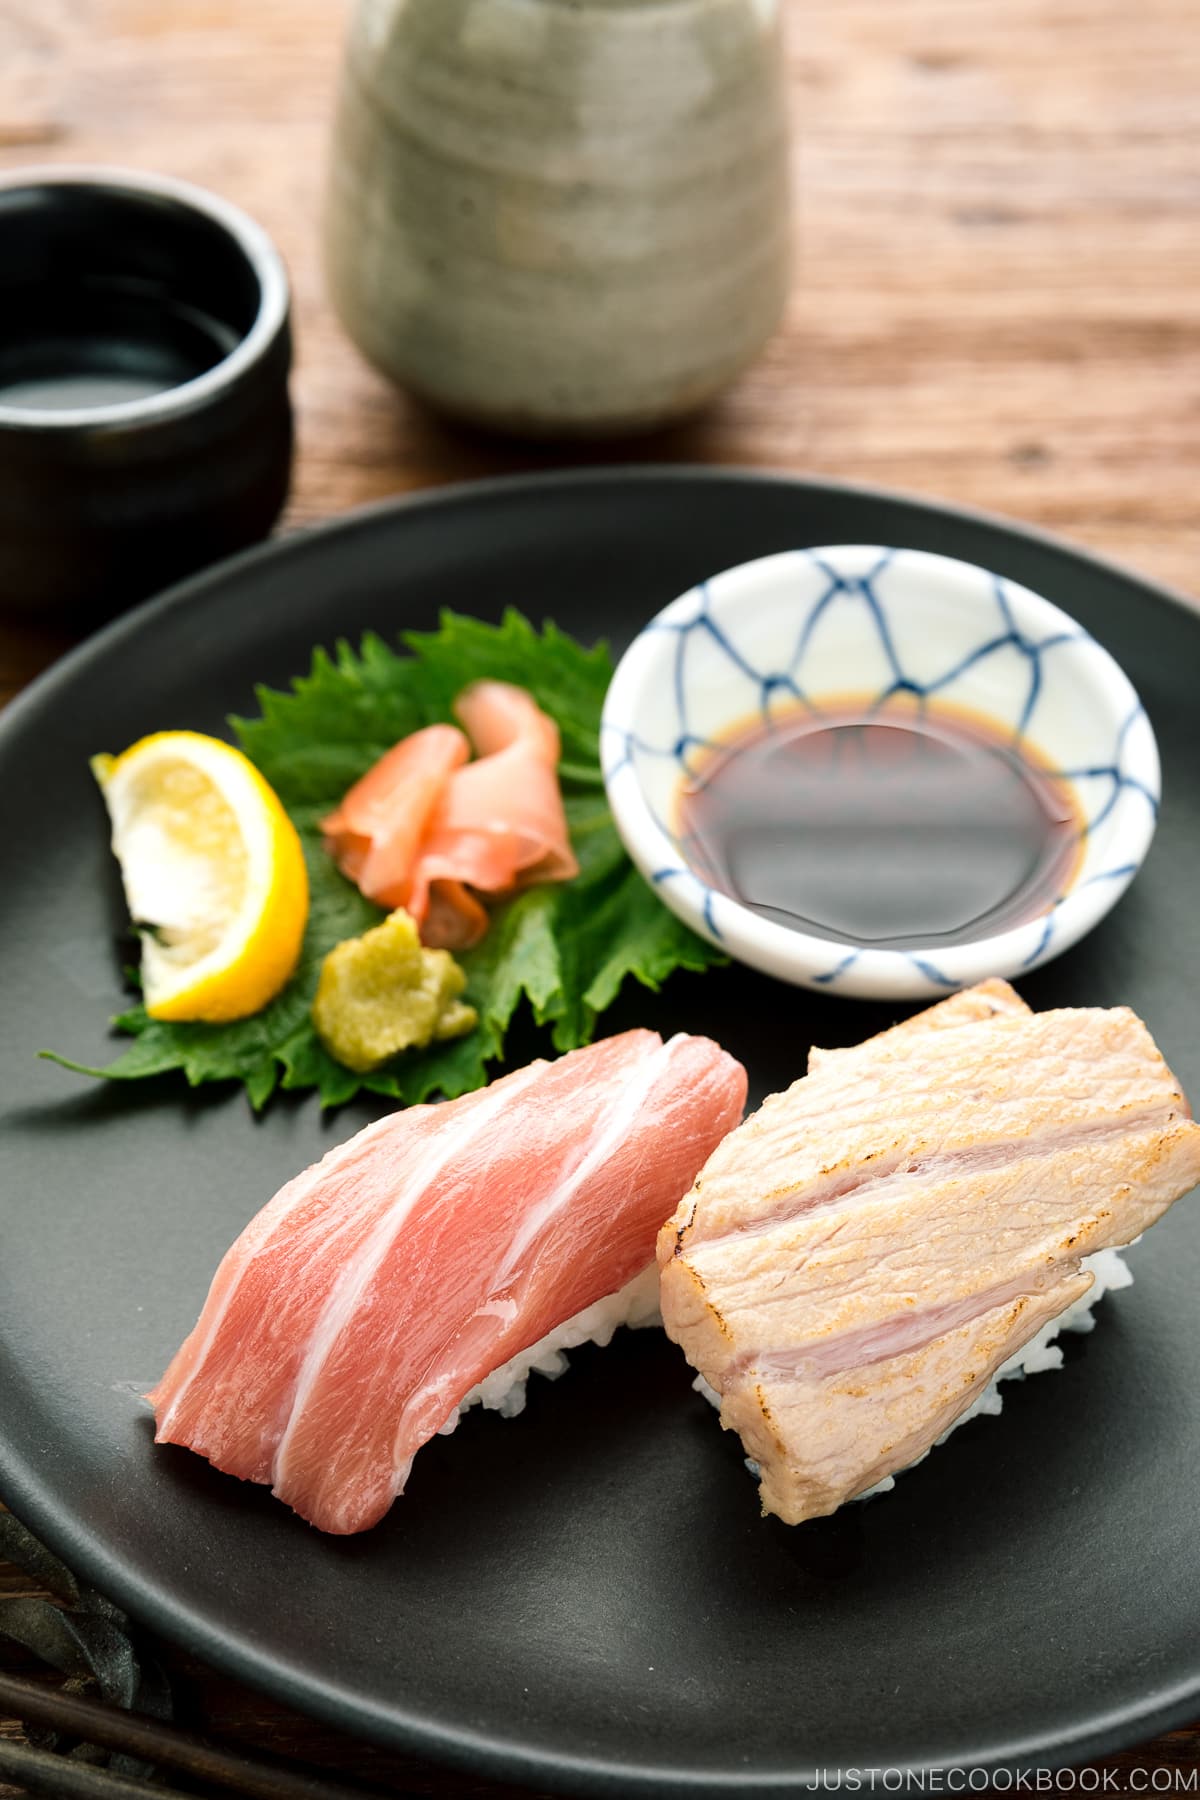 A black plate containing otoro sushi two ways, served with soy sauce, wasabi, and sushi ginger.